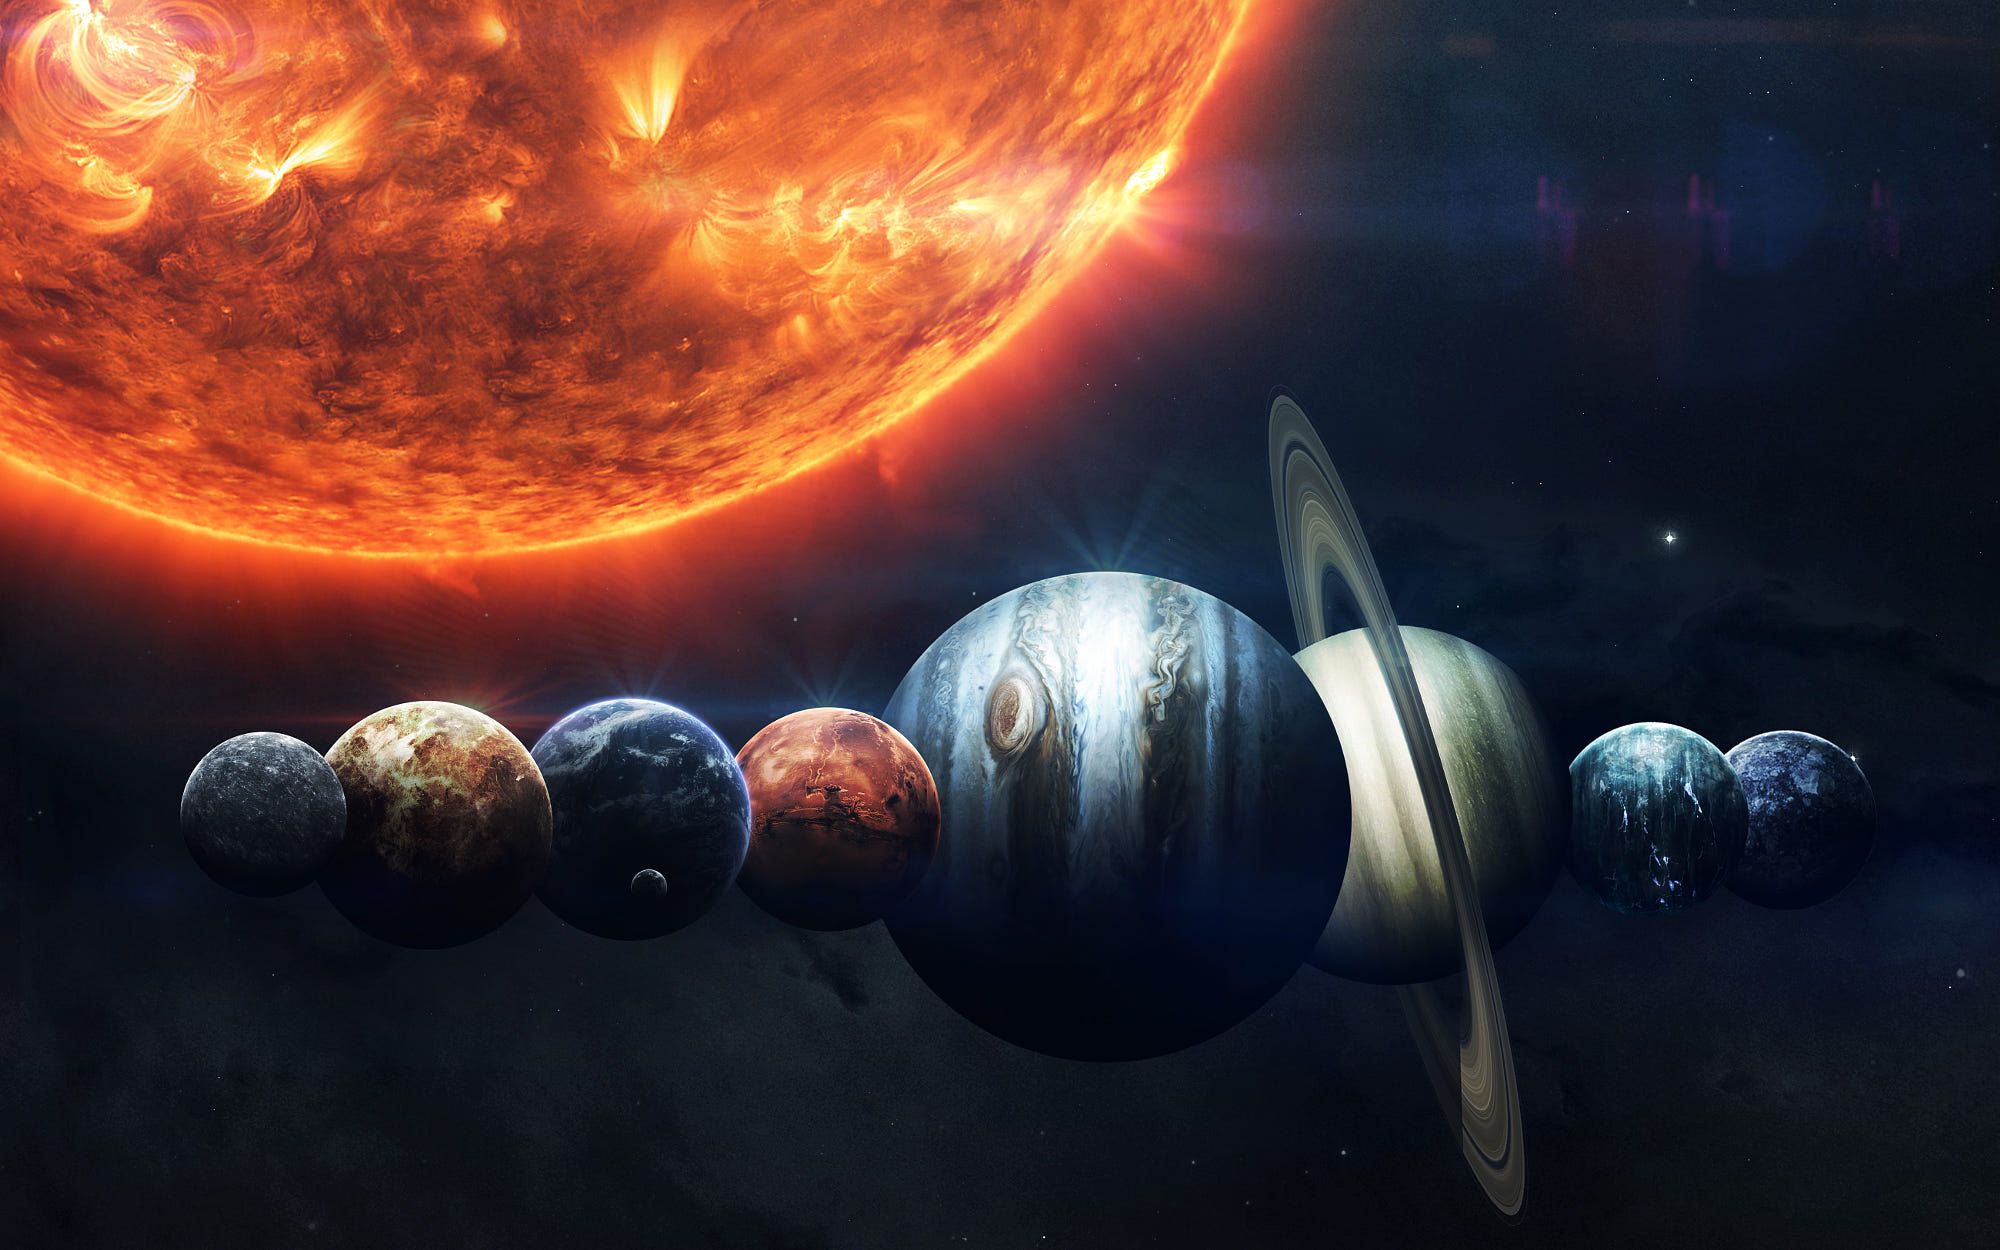 Earth, Mars, And Others. Science Fiction Space Wallpaper, Incred Wallpaper